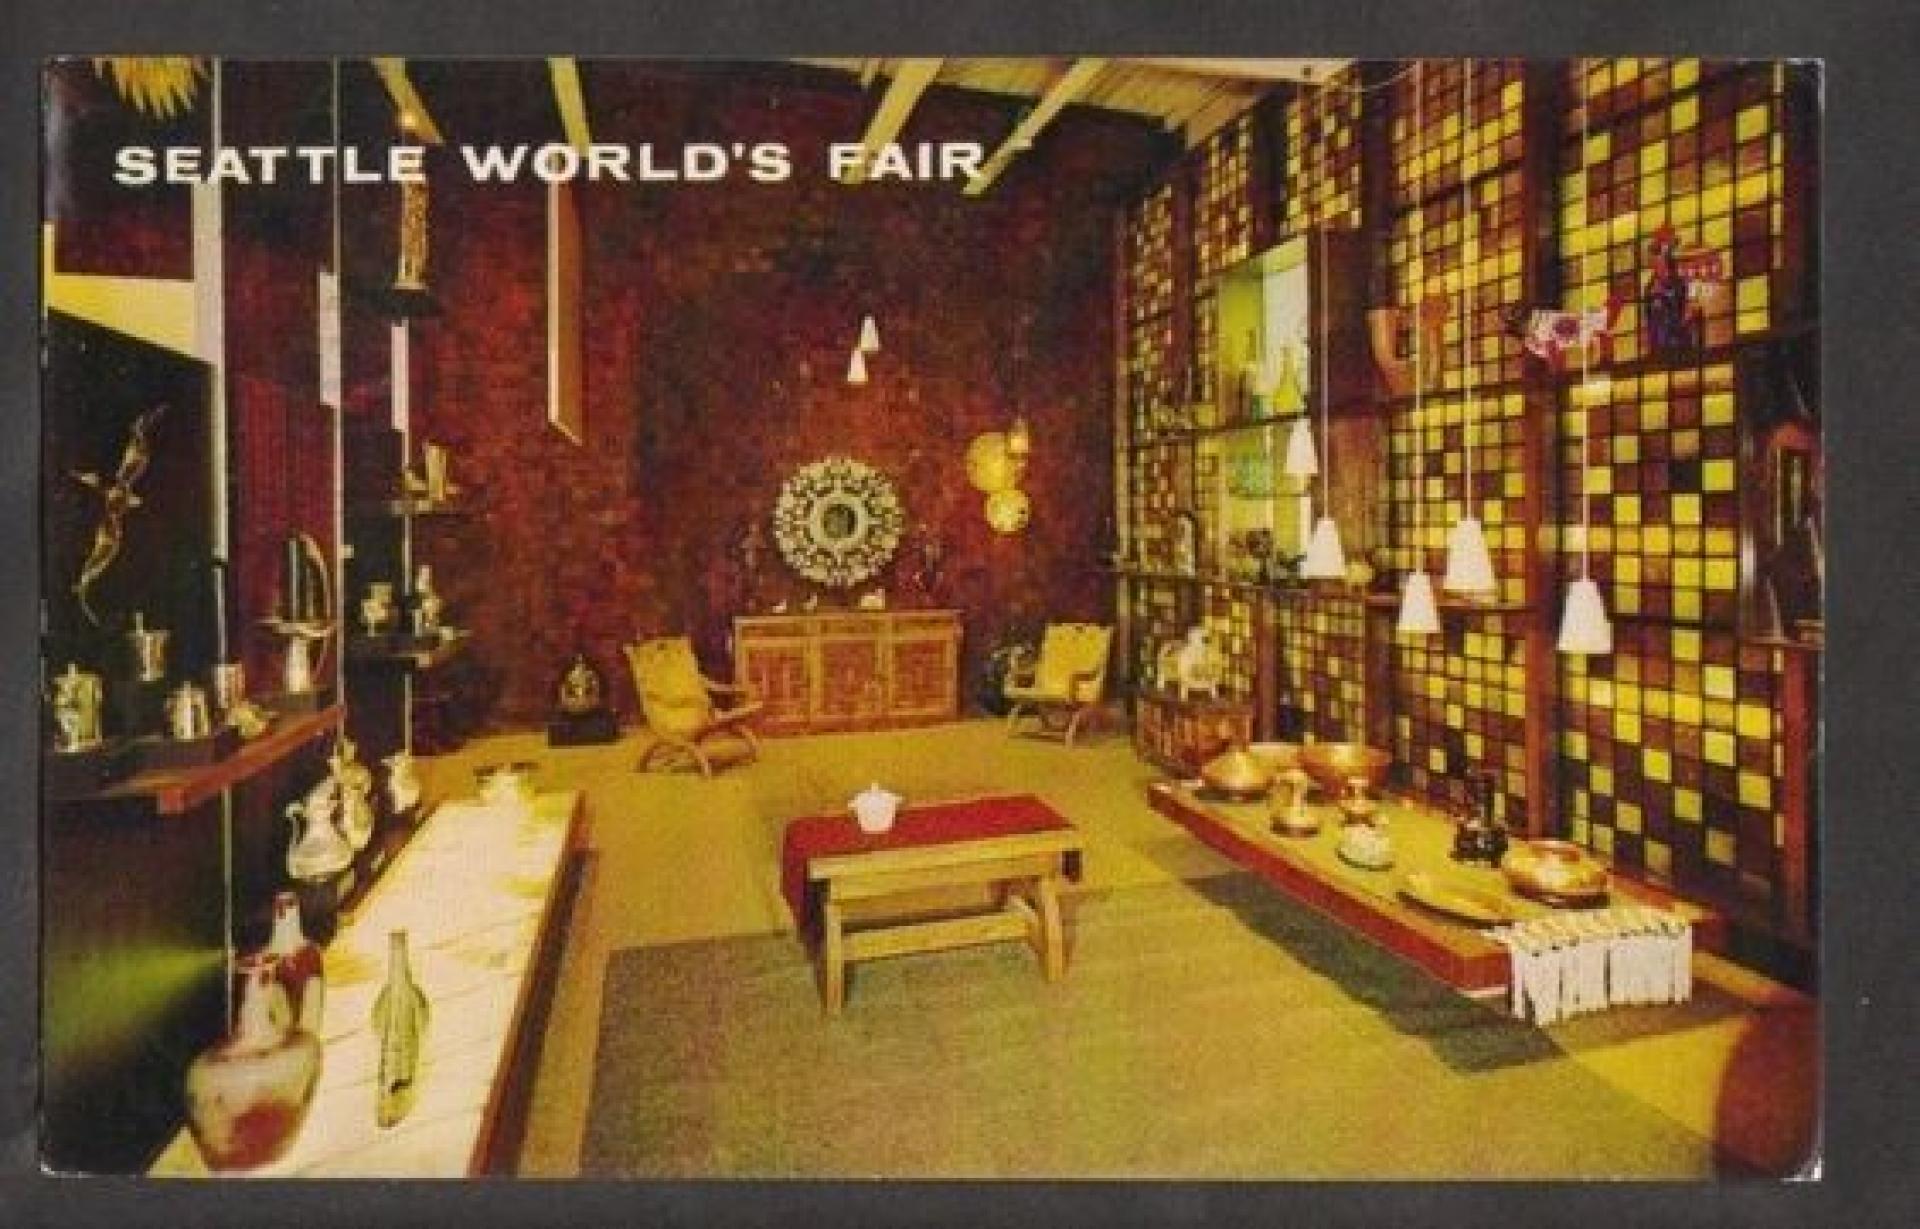 Mexican Pavilion Interior at the Seattle World’s Fair Exposition in 1962. | Photo by postcard Ebay